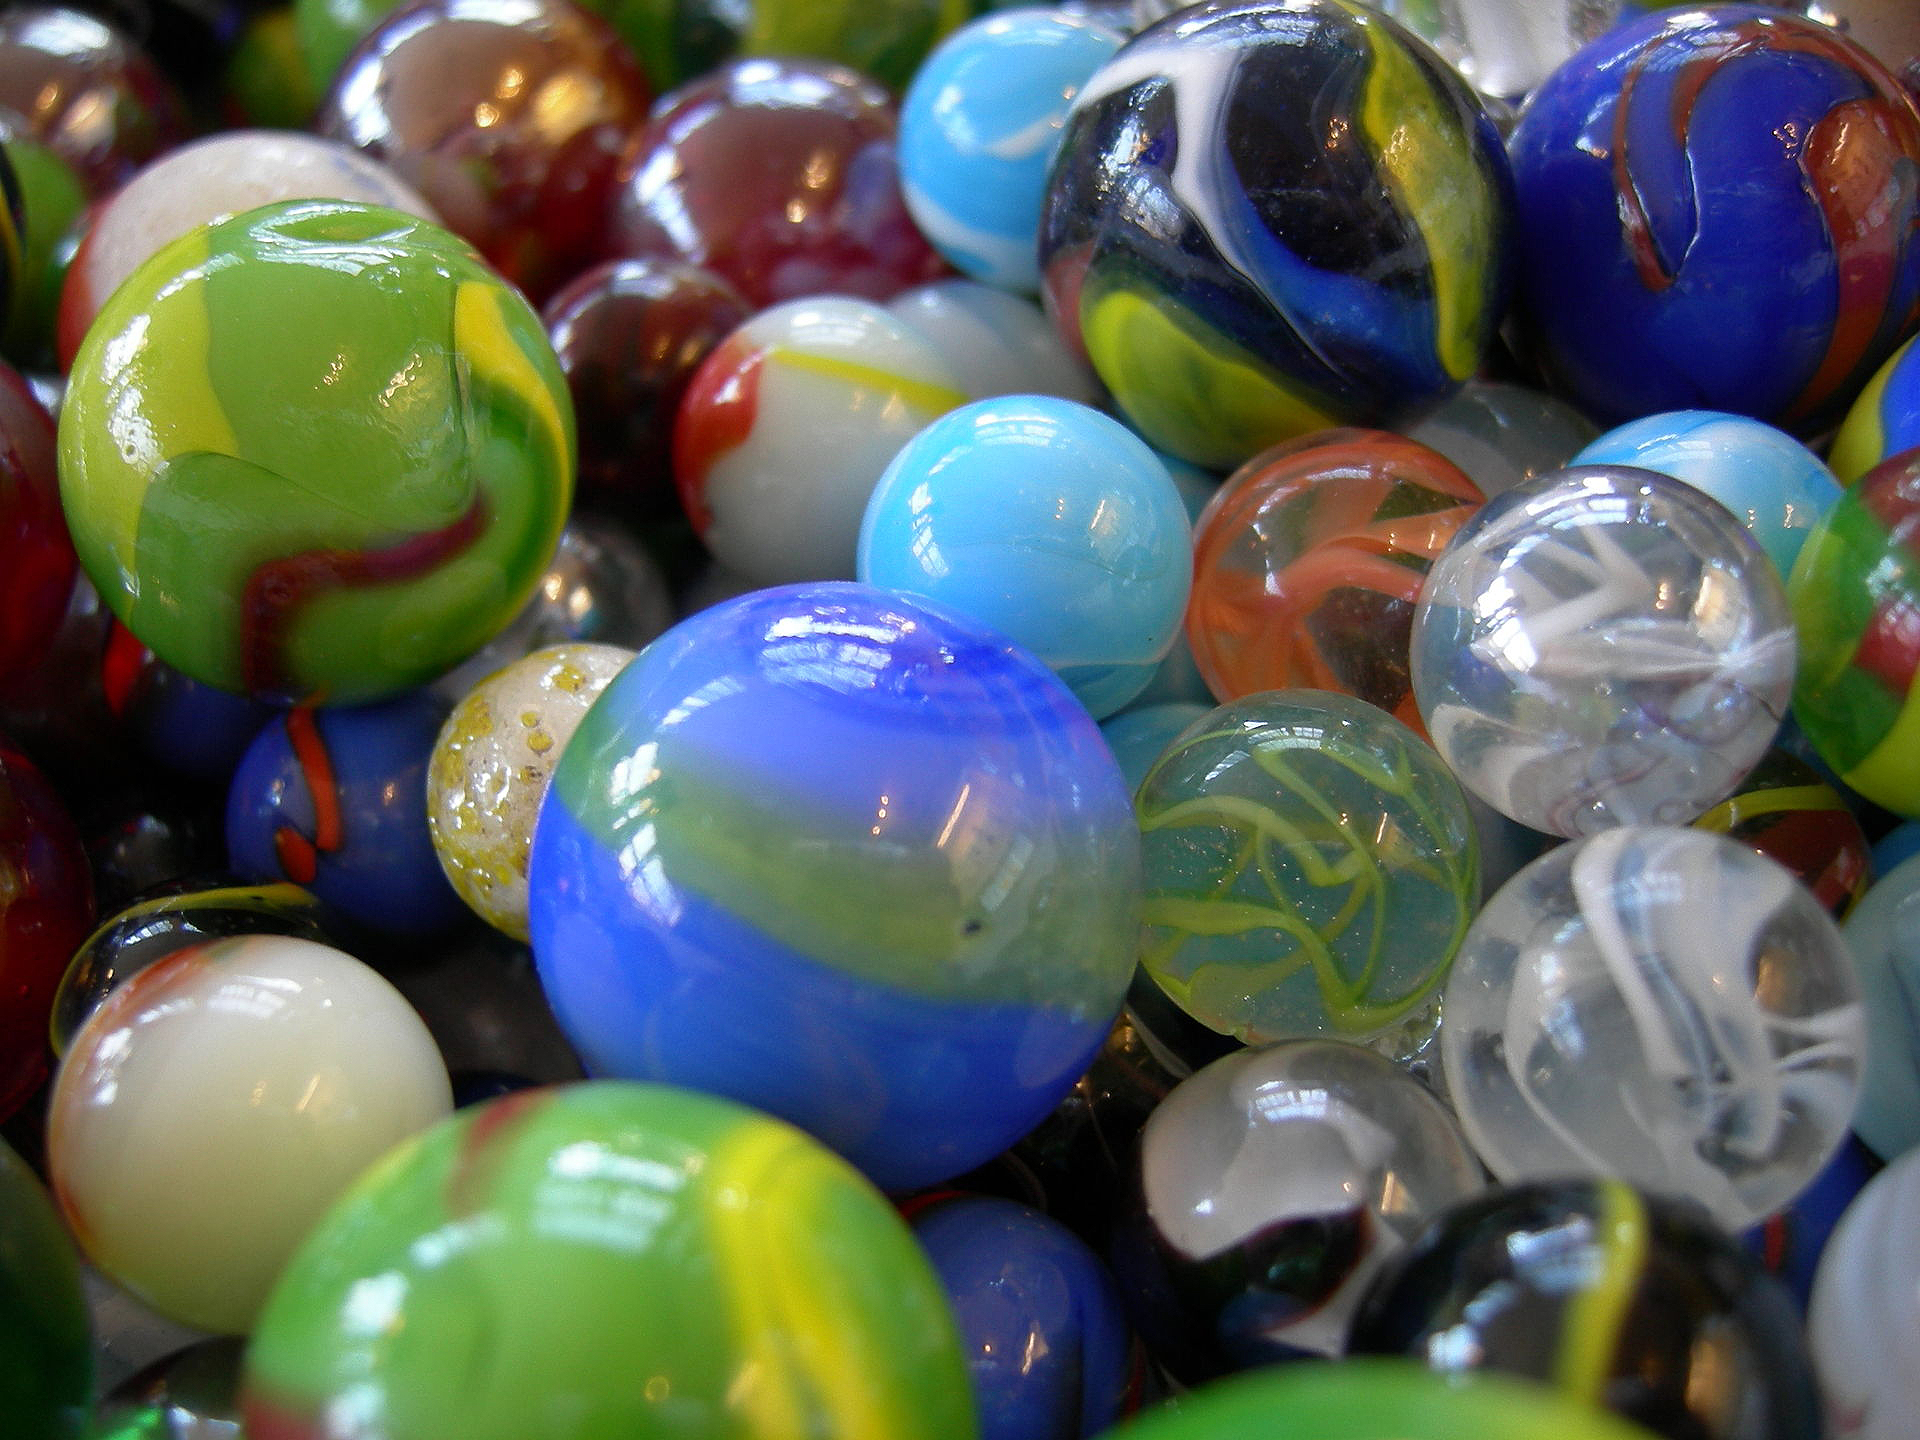 West Virginia Marble Festival to move to Paden City in 2016